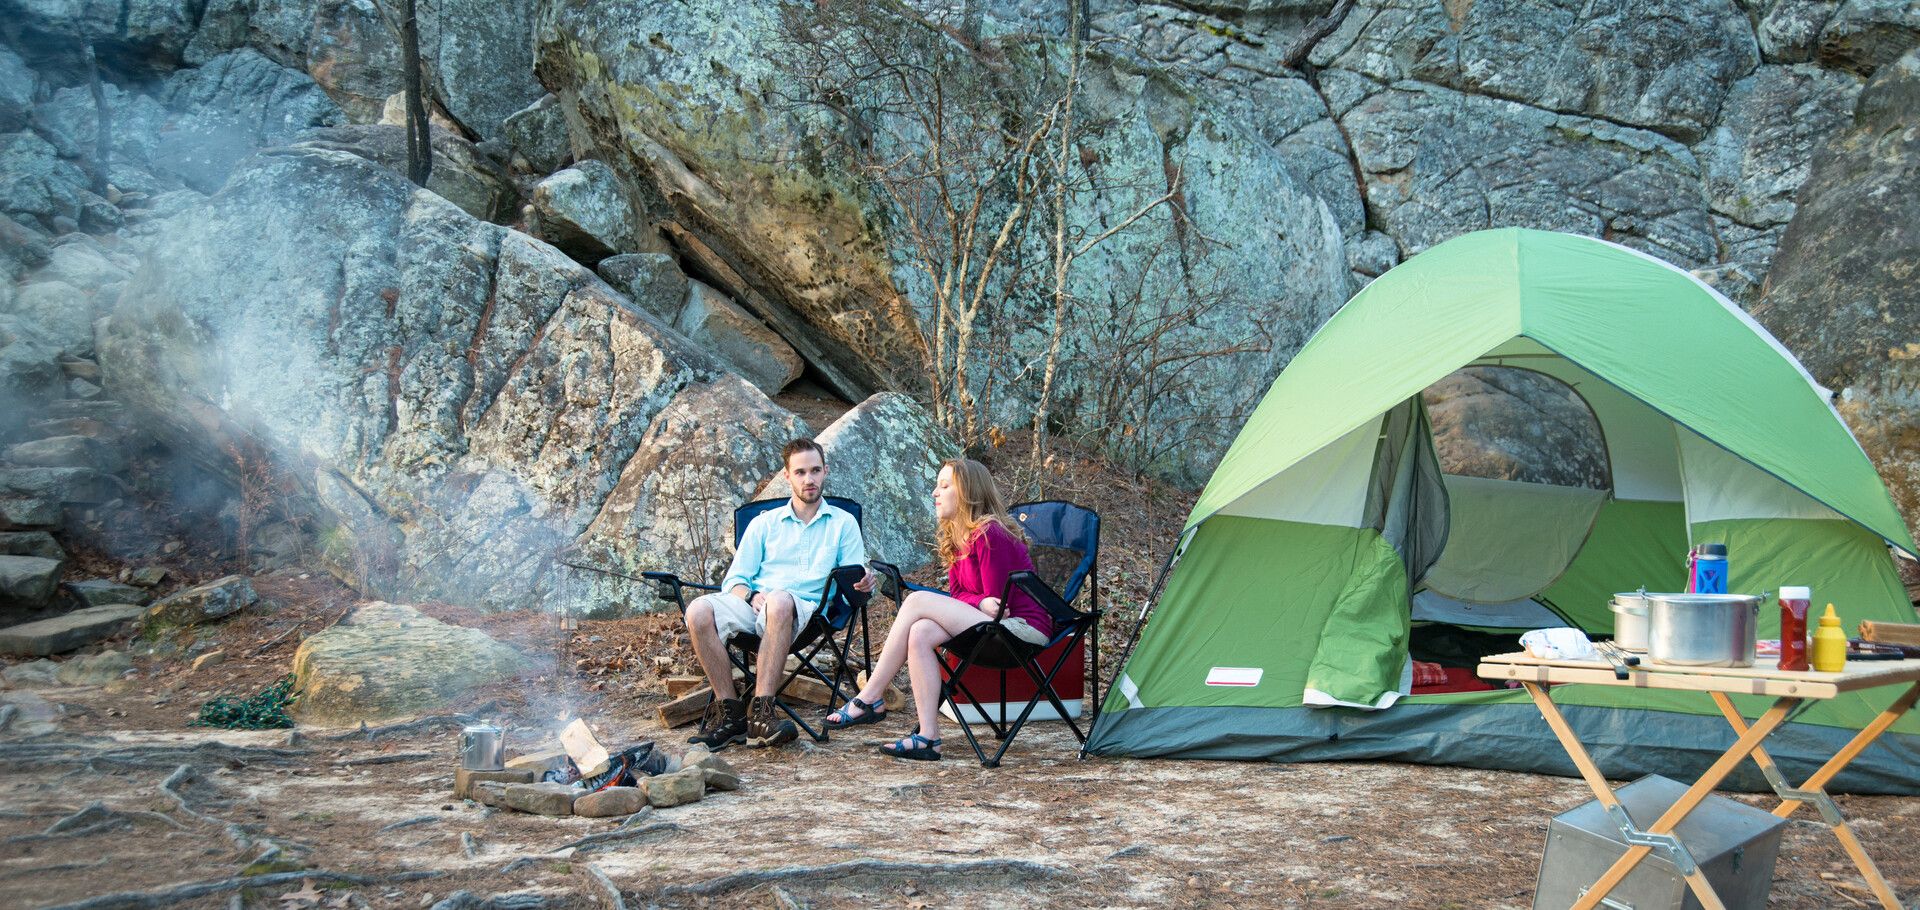 Camping & Campgrounds   - Oklahoma's Official Travel